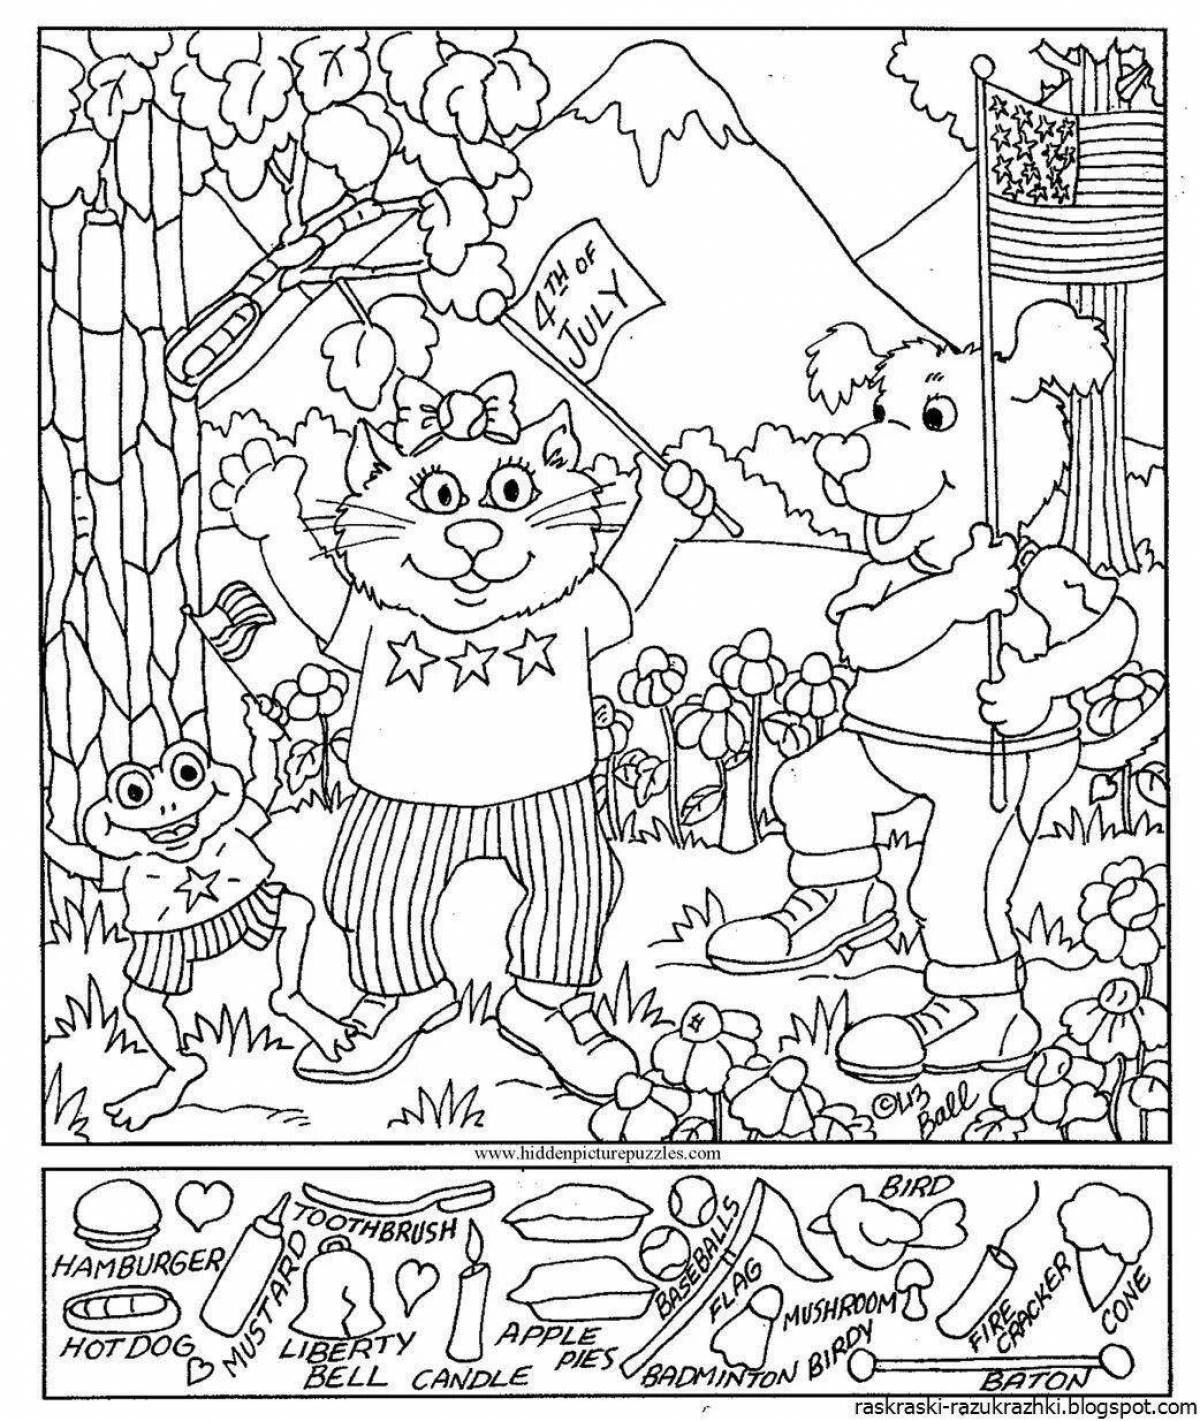 Cute object coloring book